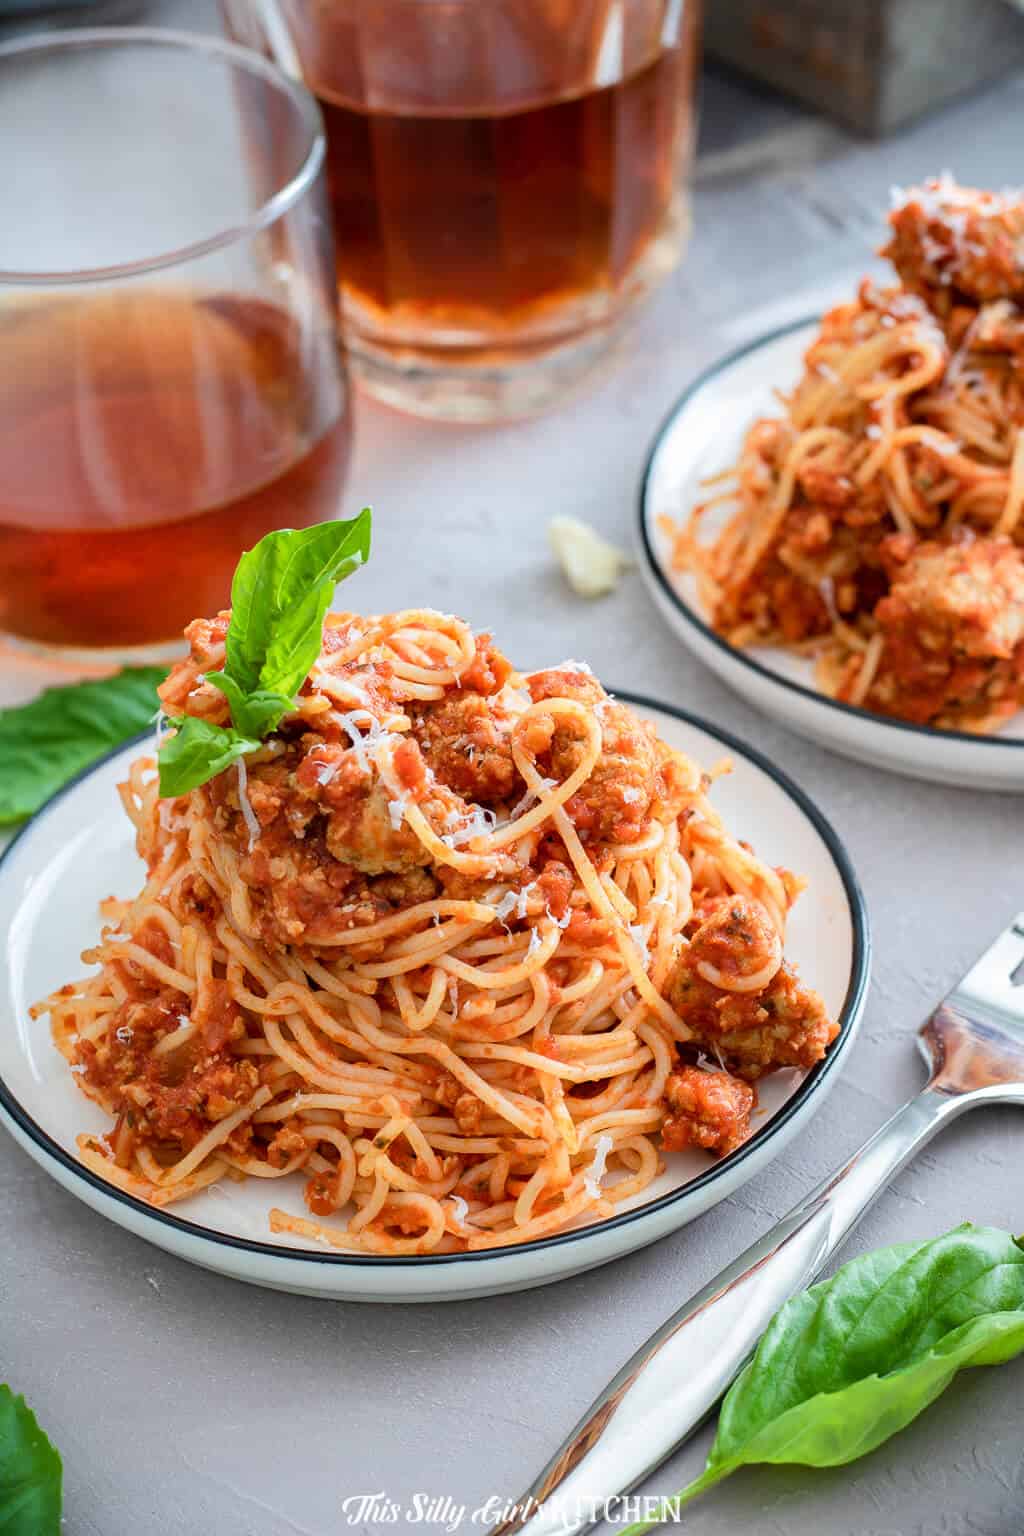 Meat Sauce made with easy homemade ground turkey sausage and bottled sauce makes this recipe easy, fast, and full of flavor. #recipe from thissillygirlskitchen.com #meatsauce #meatsaucewithturkey #spaghetti #marinara